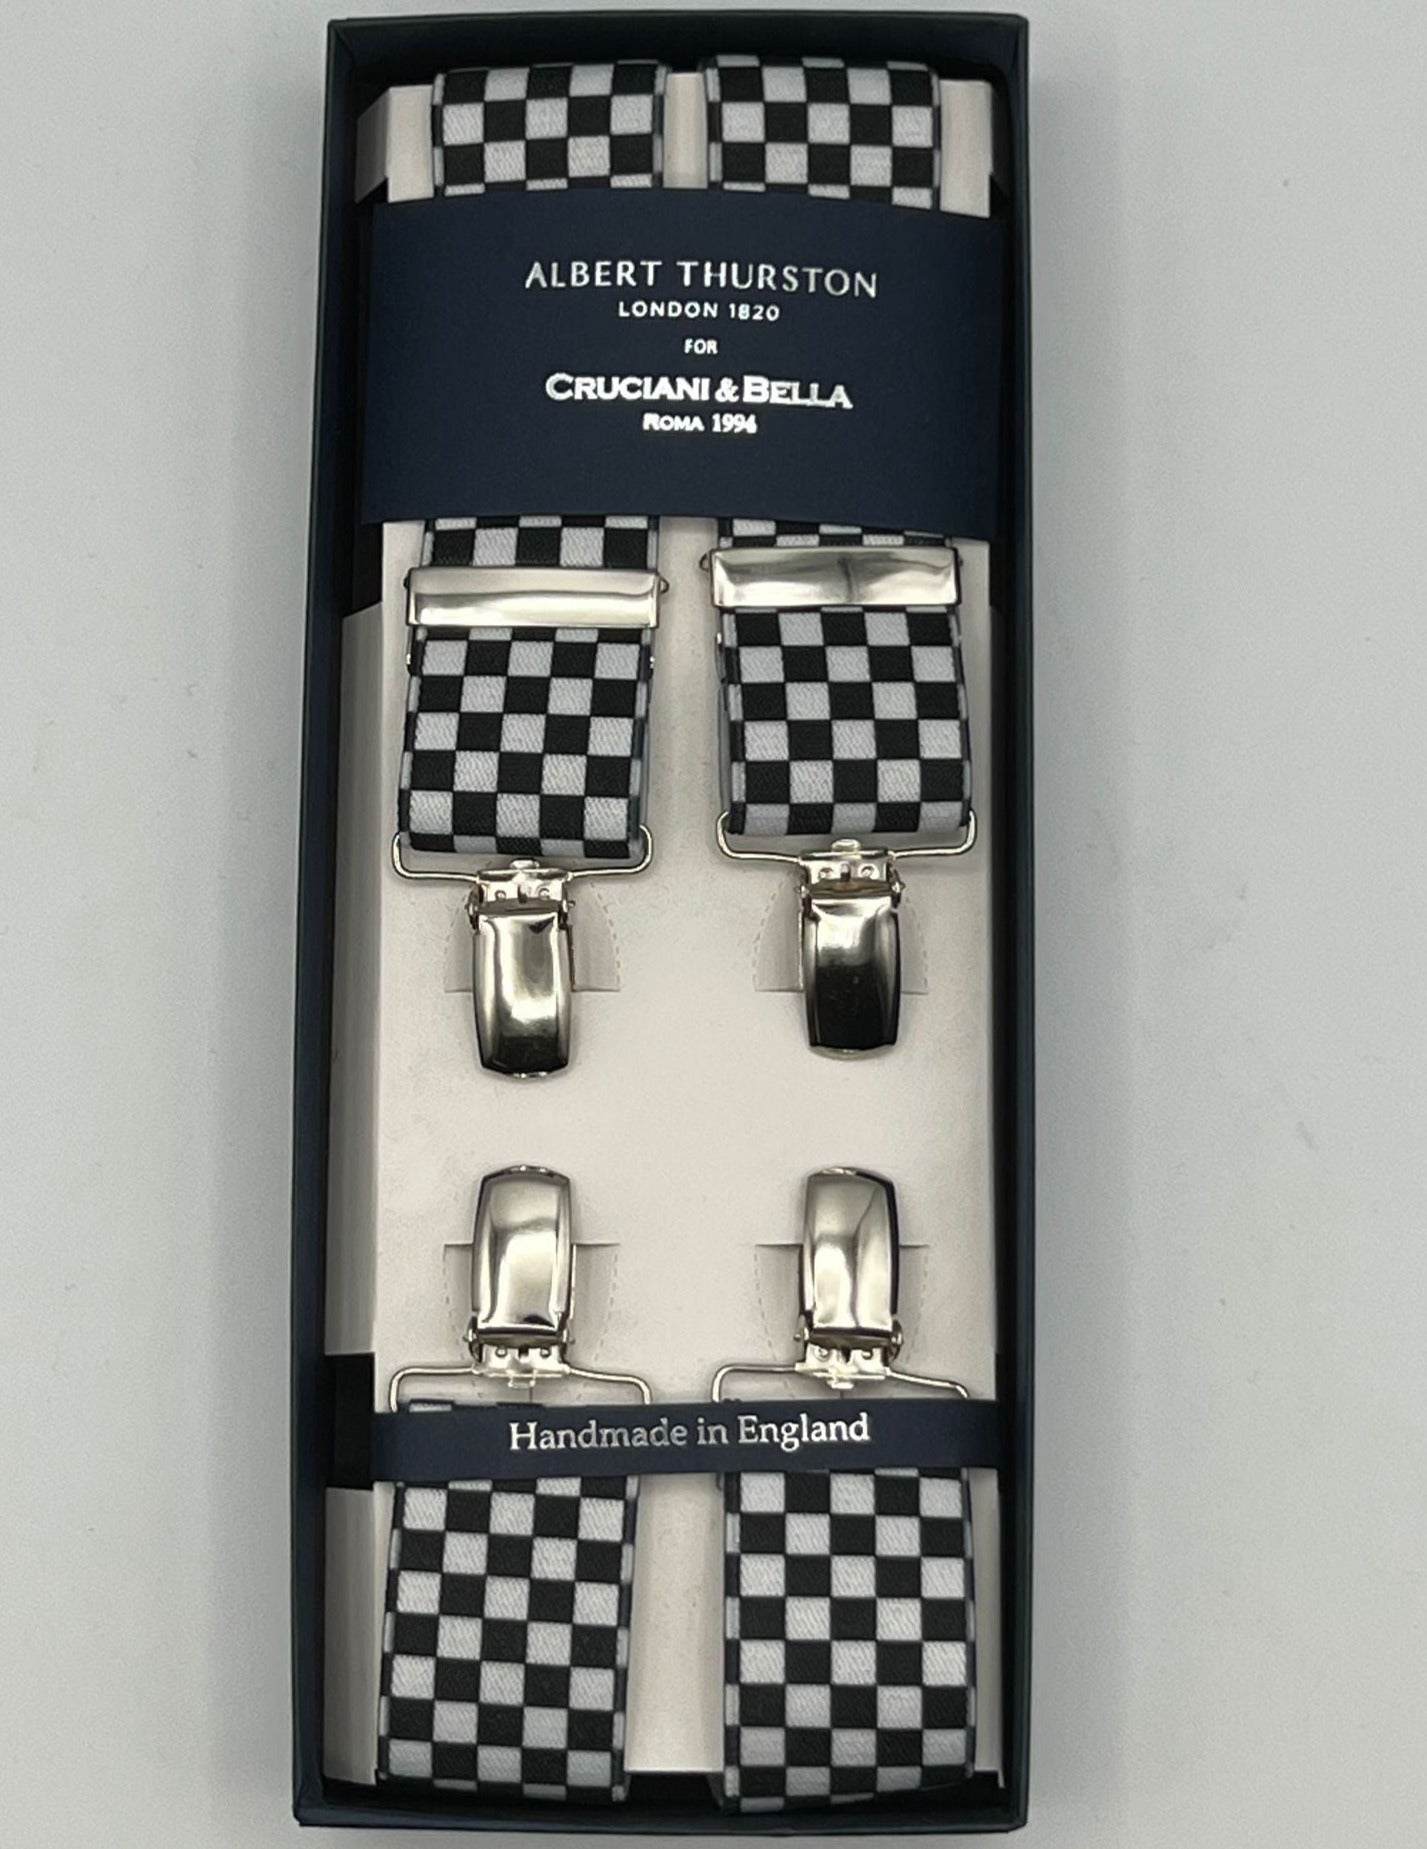 Albert Thurston for Cruciani & Bella Made in England Clip on Adjustable Sizing 35 mm elastic braces Black and White Checks X-Shaped Nickel Fittings Size L